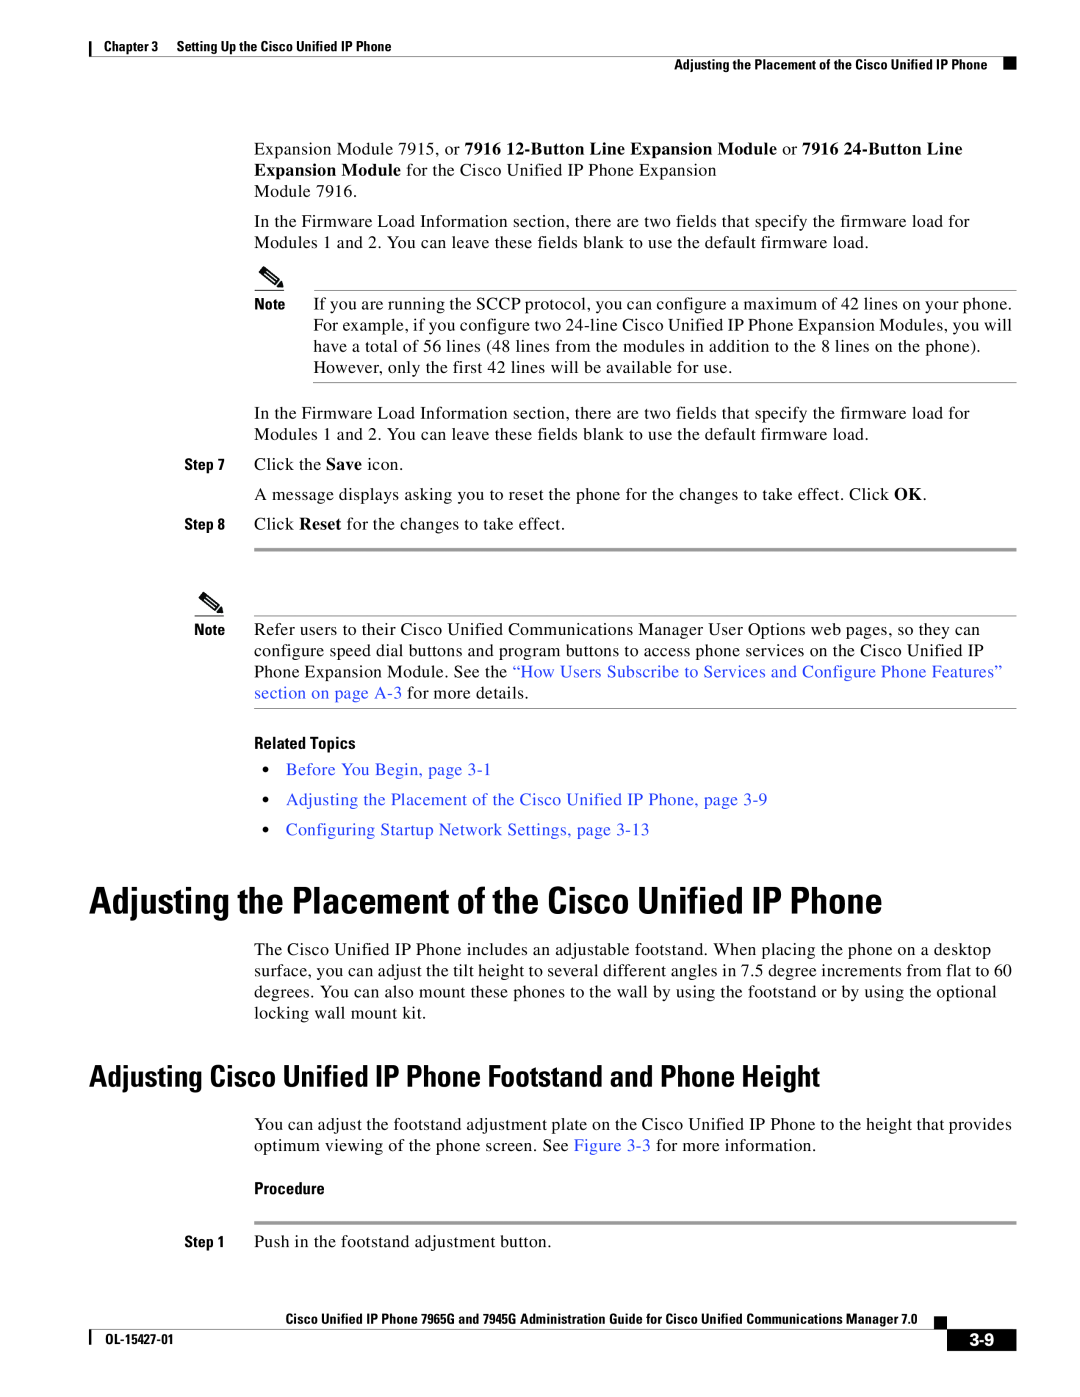 Cisco Systems 7945G, 7965G Adjusting the Placement of the Cisco Unified IP Phone, Related Topics, Before You Begin, page 